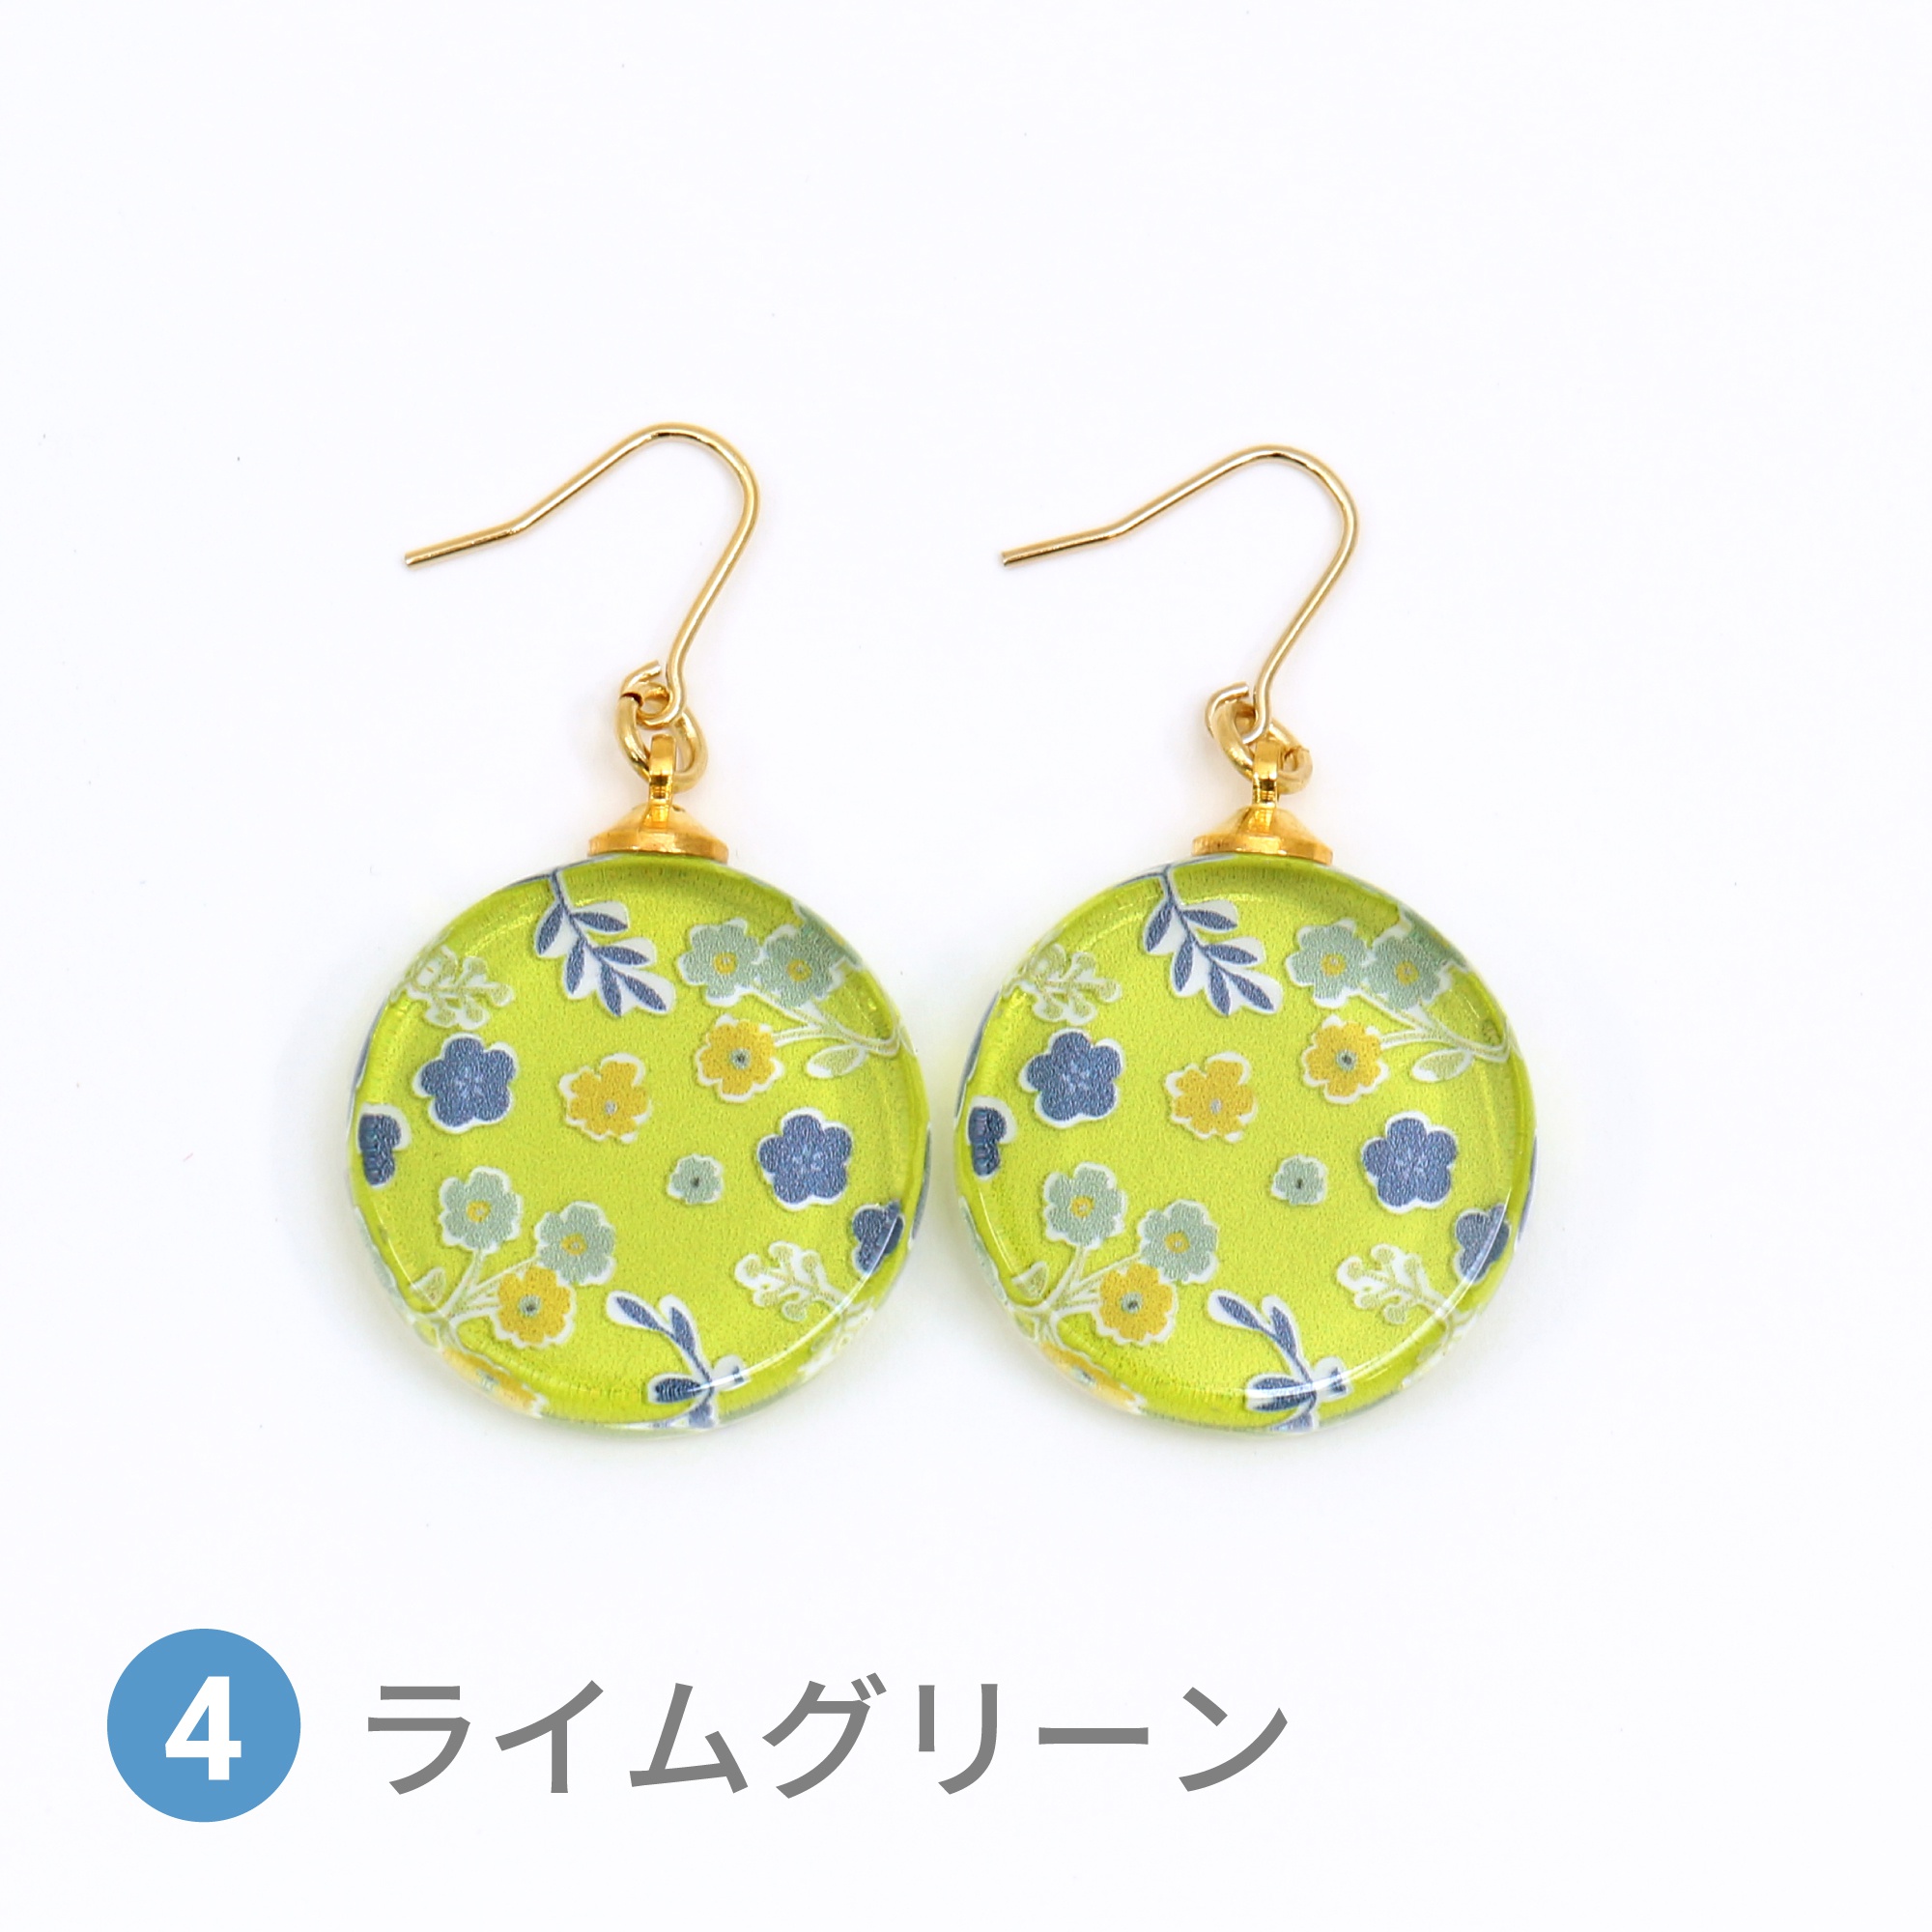 Glass accessories Pierced Earring FLORAL PATTERN lime green round shape